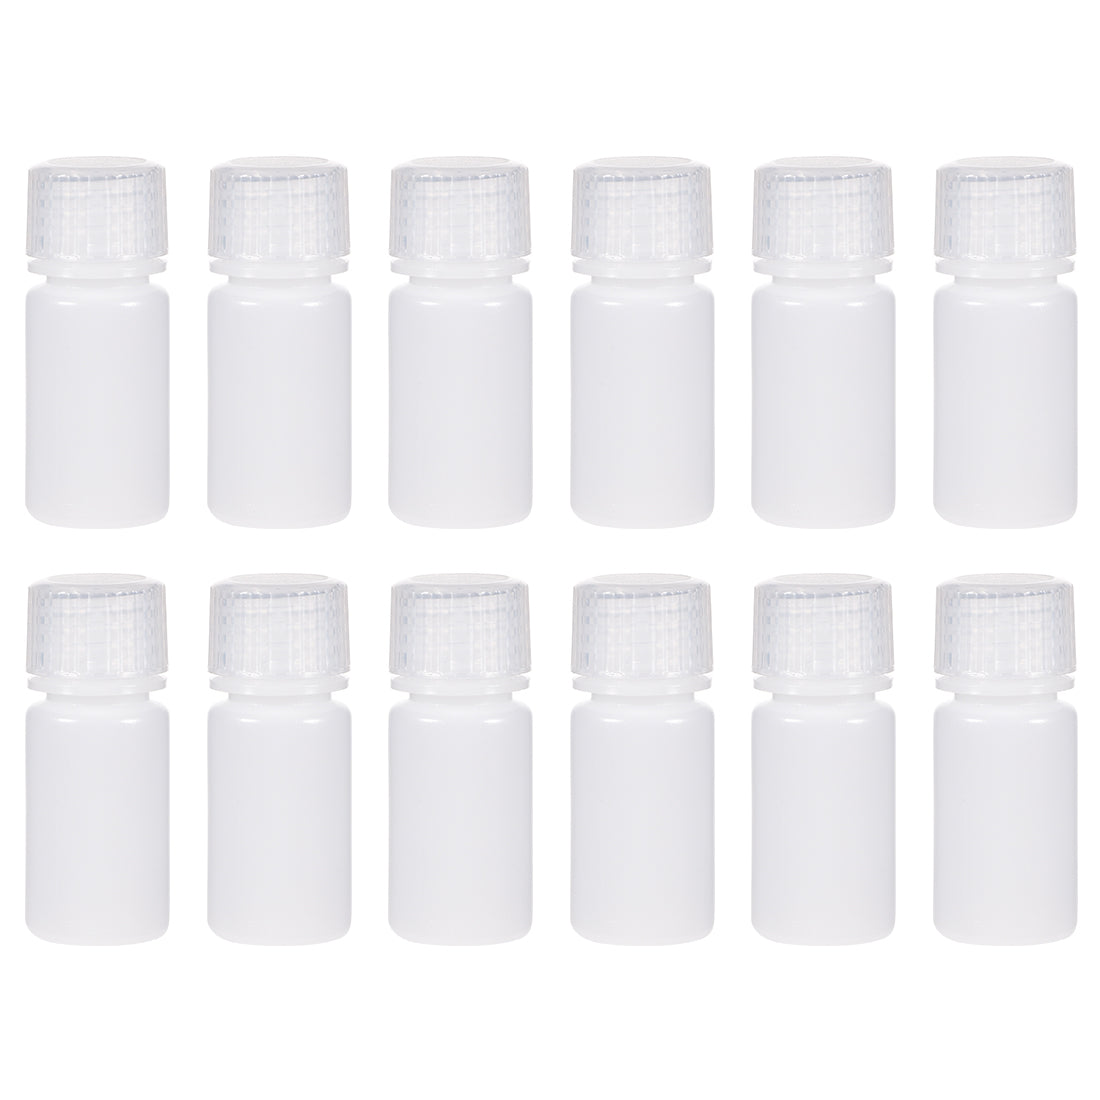 uxcell Uxcell Plastic Lab Chemical Reagent Bottle, 15ml/0.5 oz Small Mouth Sample Sealing Liquid/Solid Storage Bottles, White 12pcs